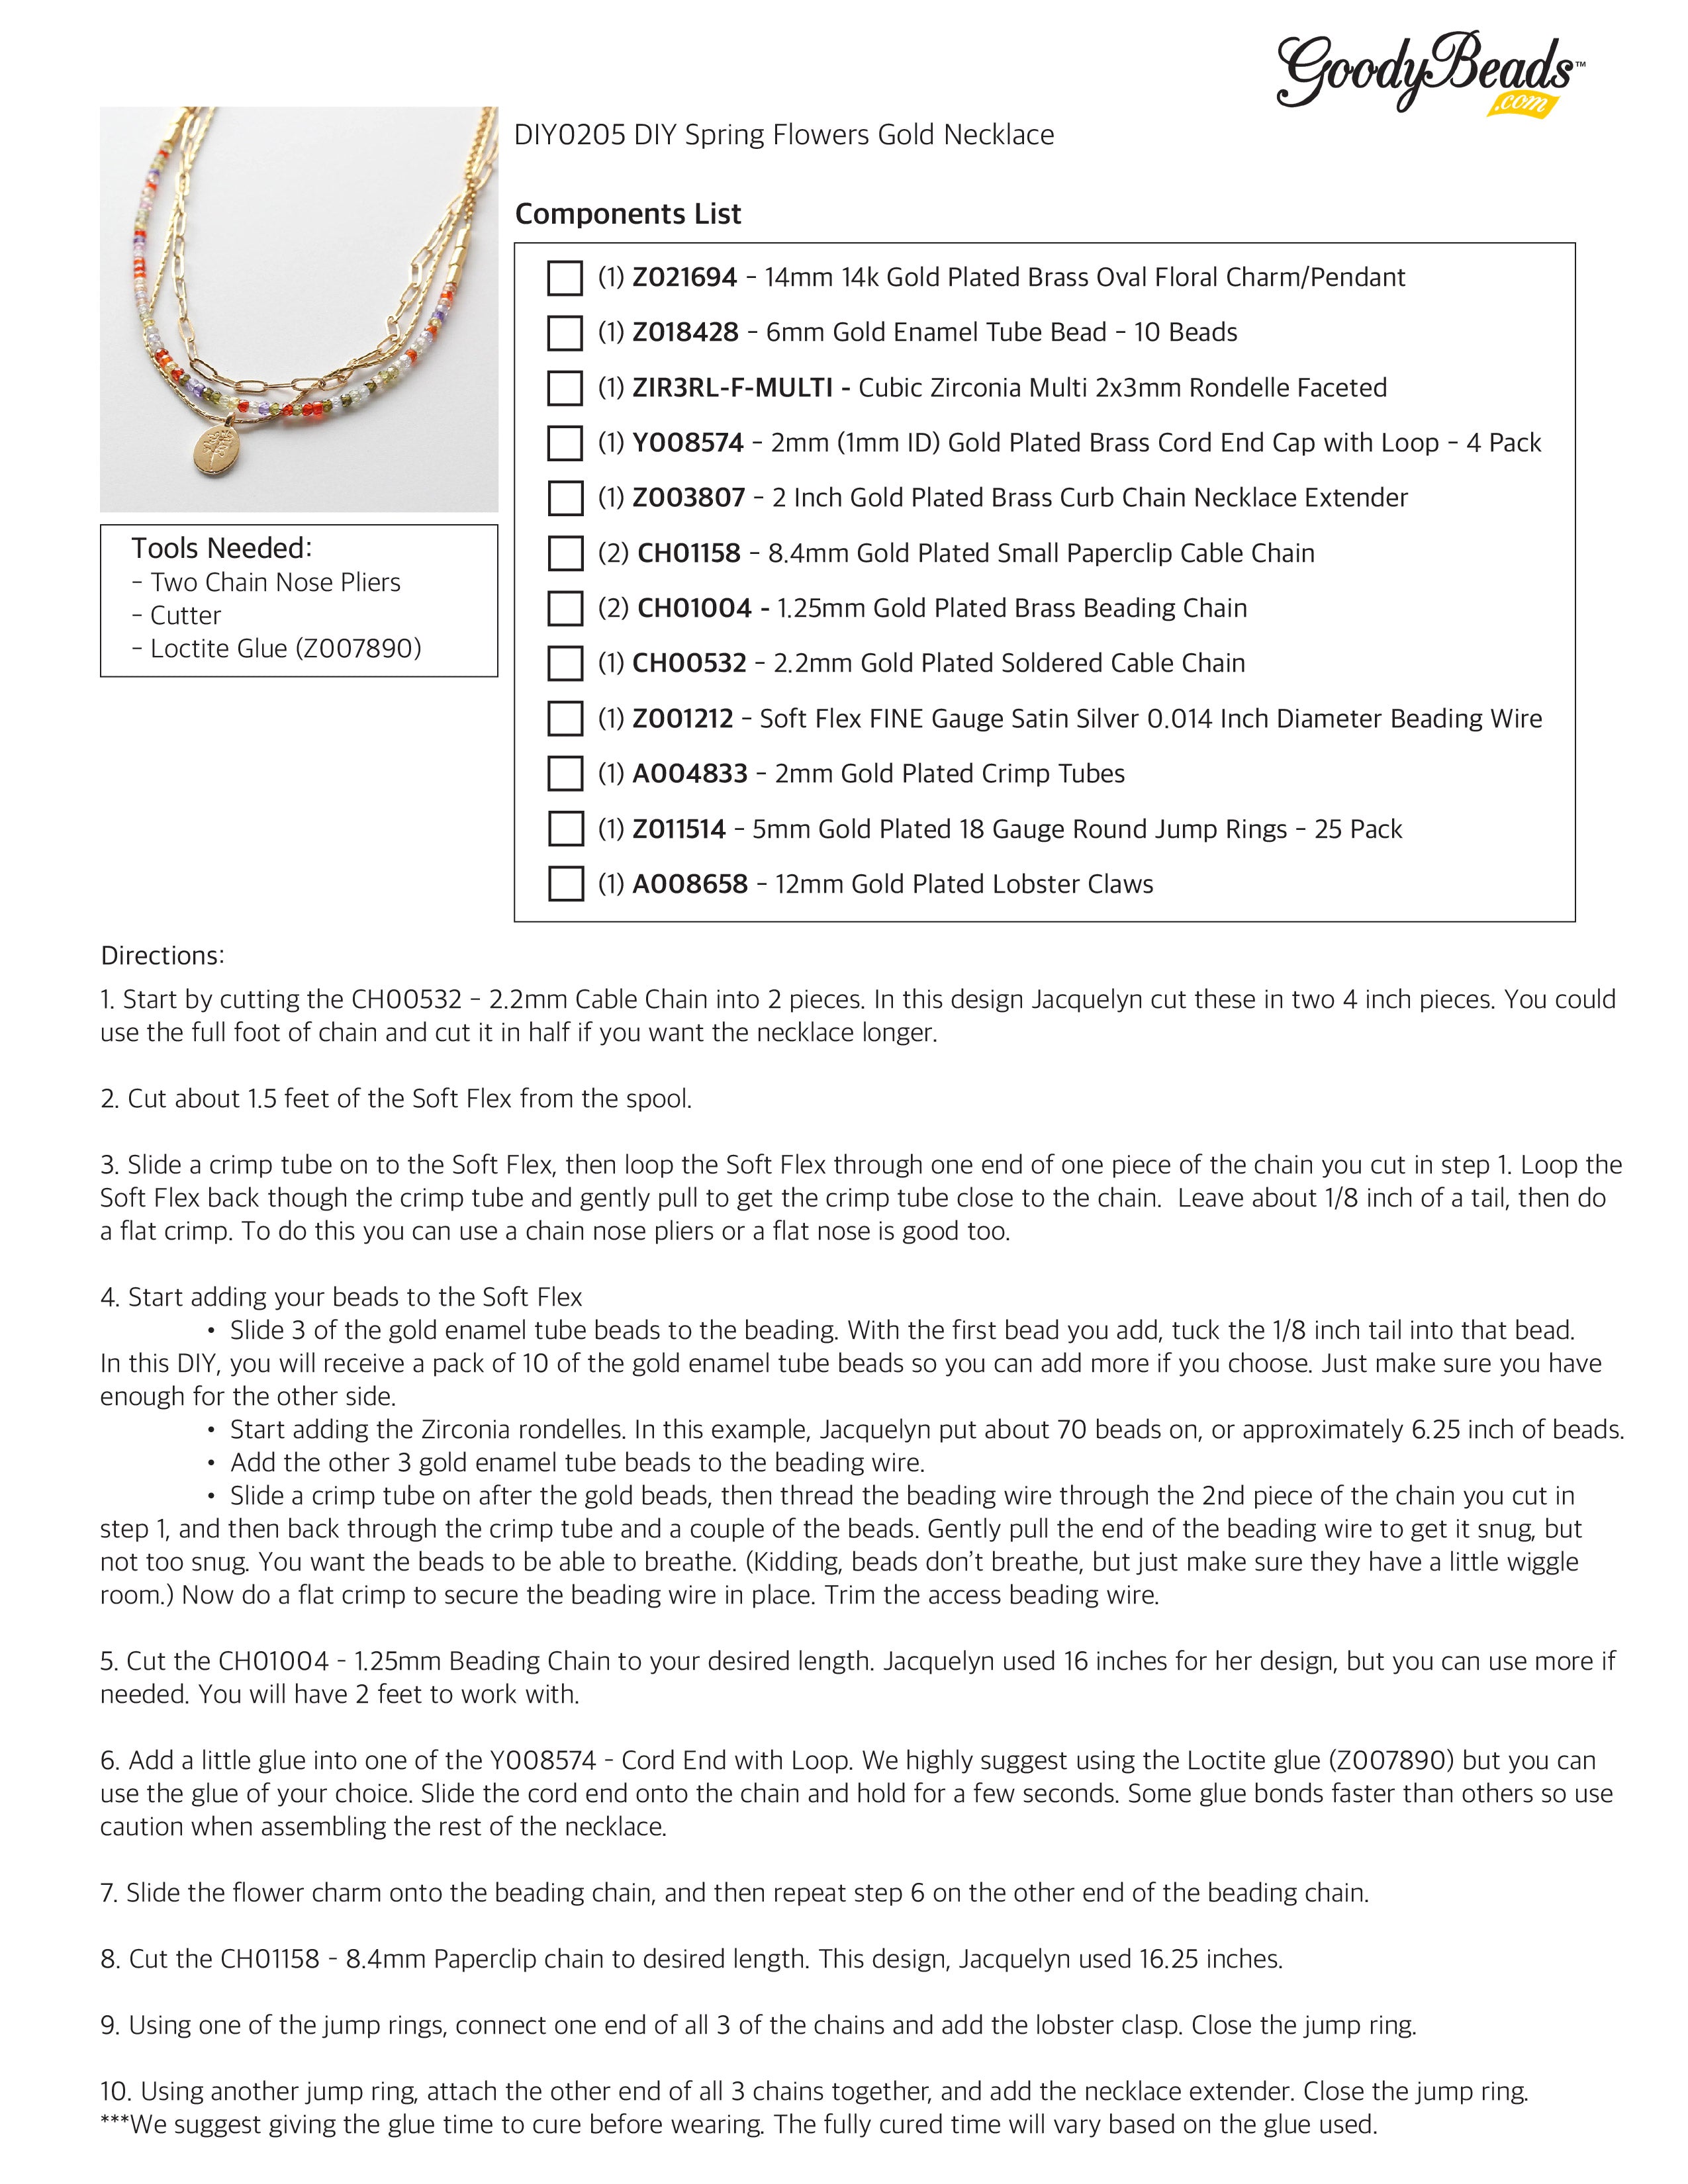 INSTRUCTIONS for DIY Spring Flowers Gold Necklace